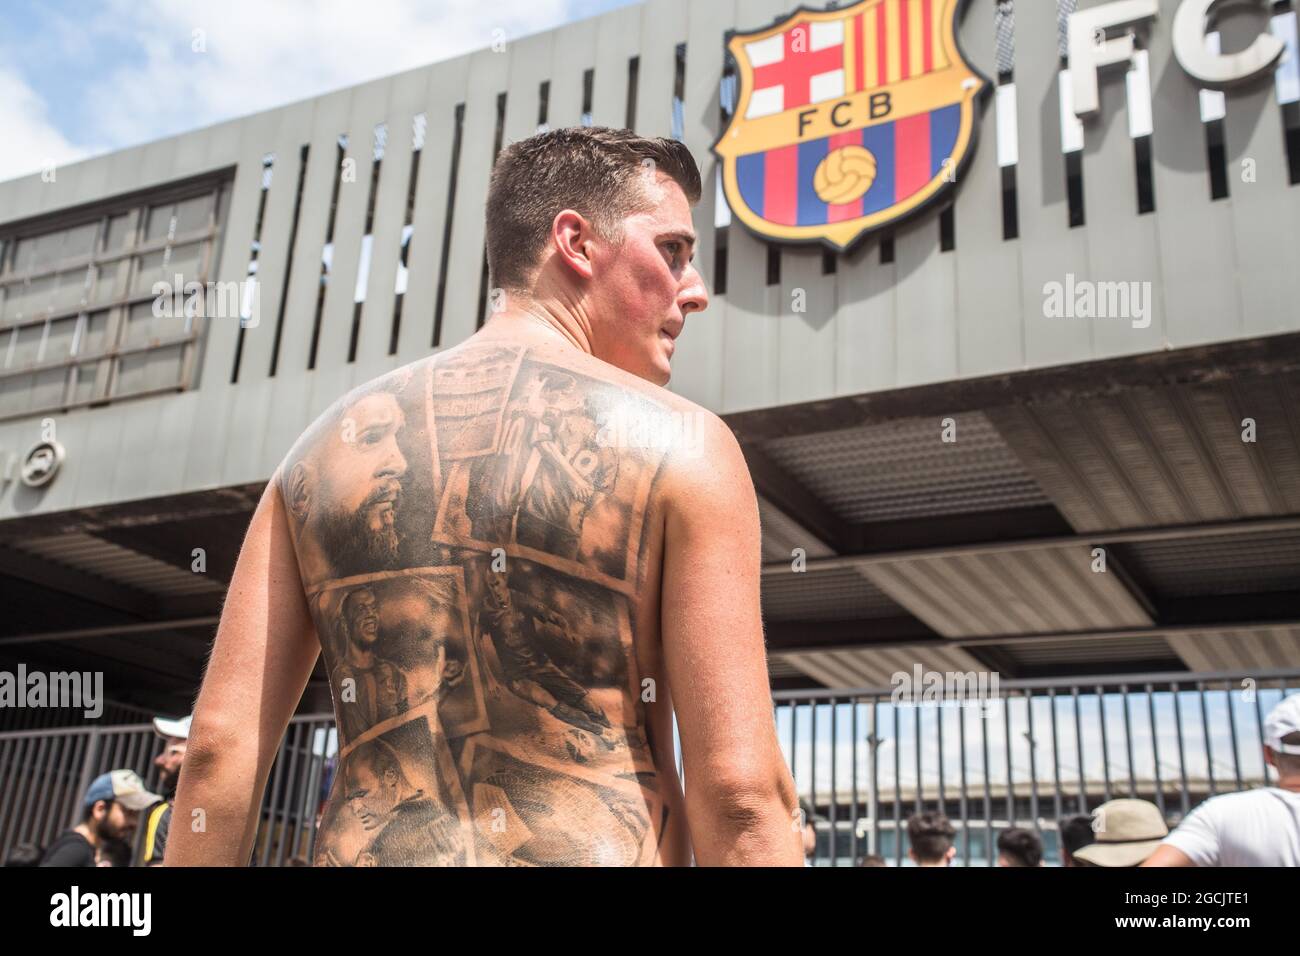 Barcelona Catalonia Spain 8th Aug 2021 Lionel Messi fan with a tattoo  on his back with the face of Messi and other idols of FC Barcelona such as  Ronaldinho Ronaldo de Assis